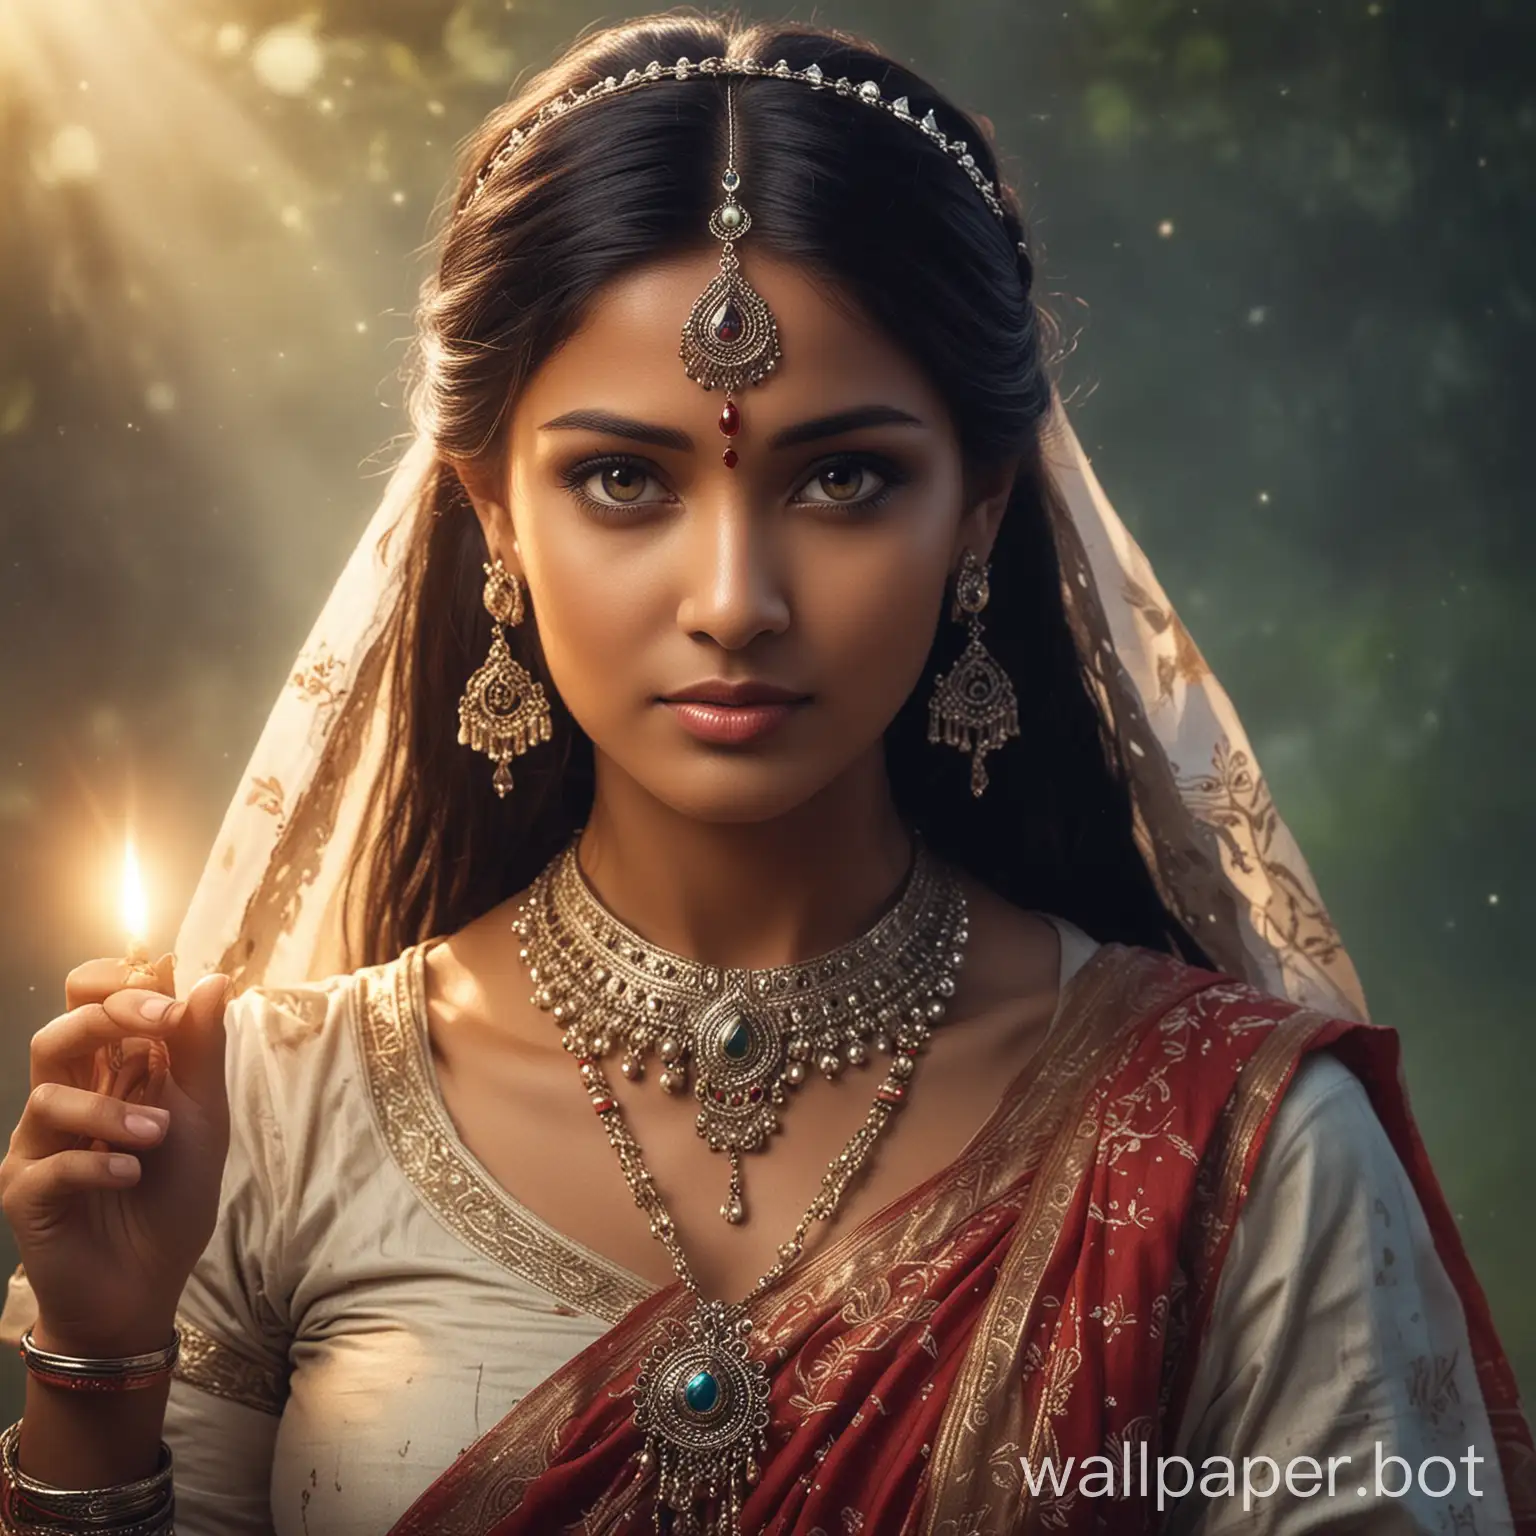 Mystical-Indian-Lady-in-Traditional-Attire-and-Ornate-Jewelry